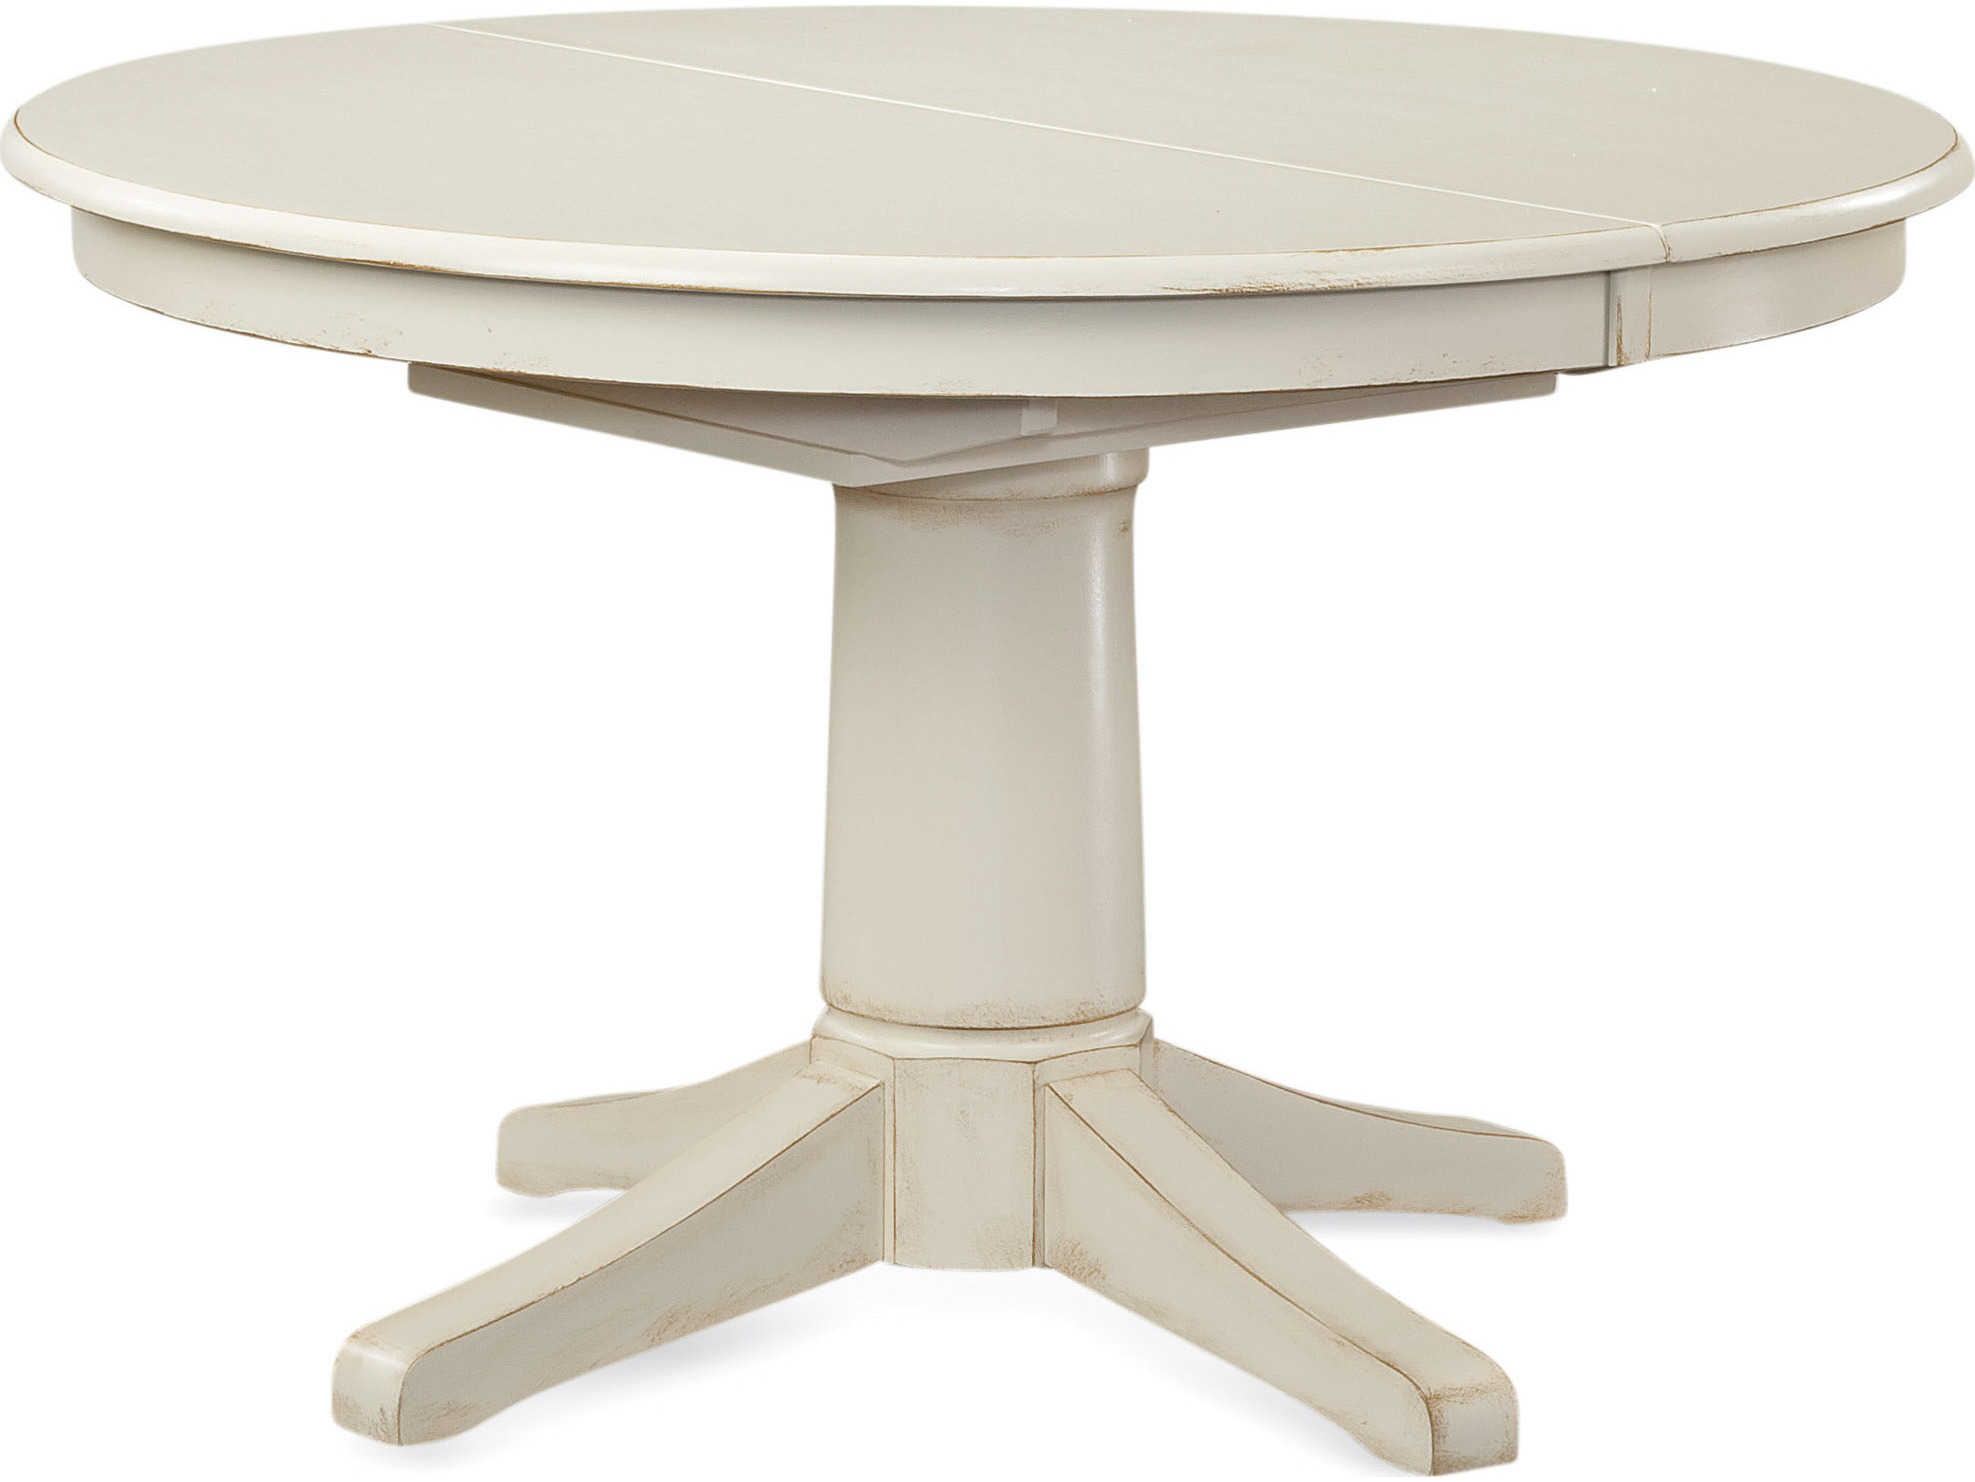 Braxton Culler Hues 48 66 Wide Round Dining Table Bxc1064e75